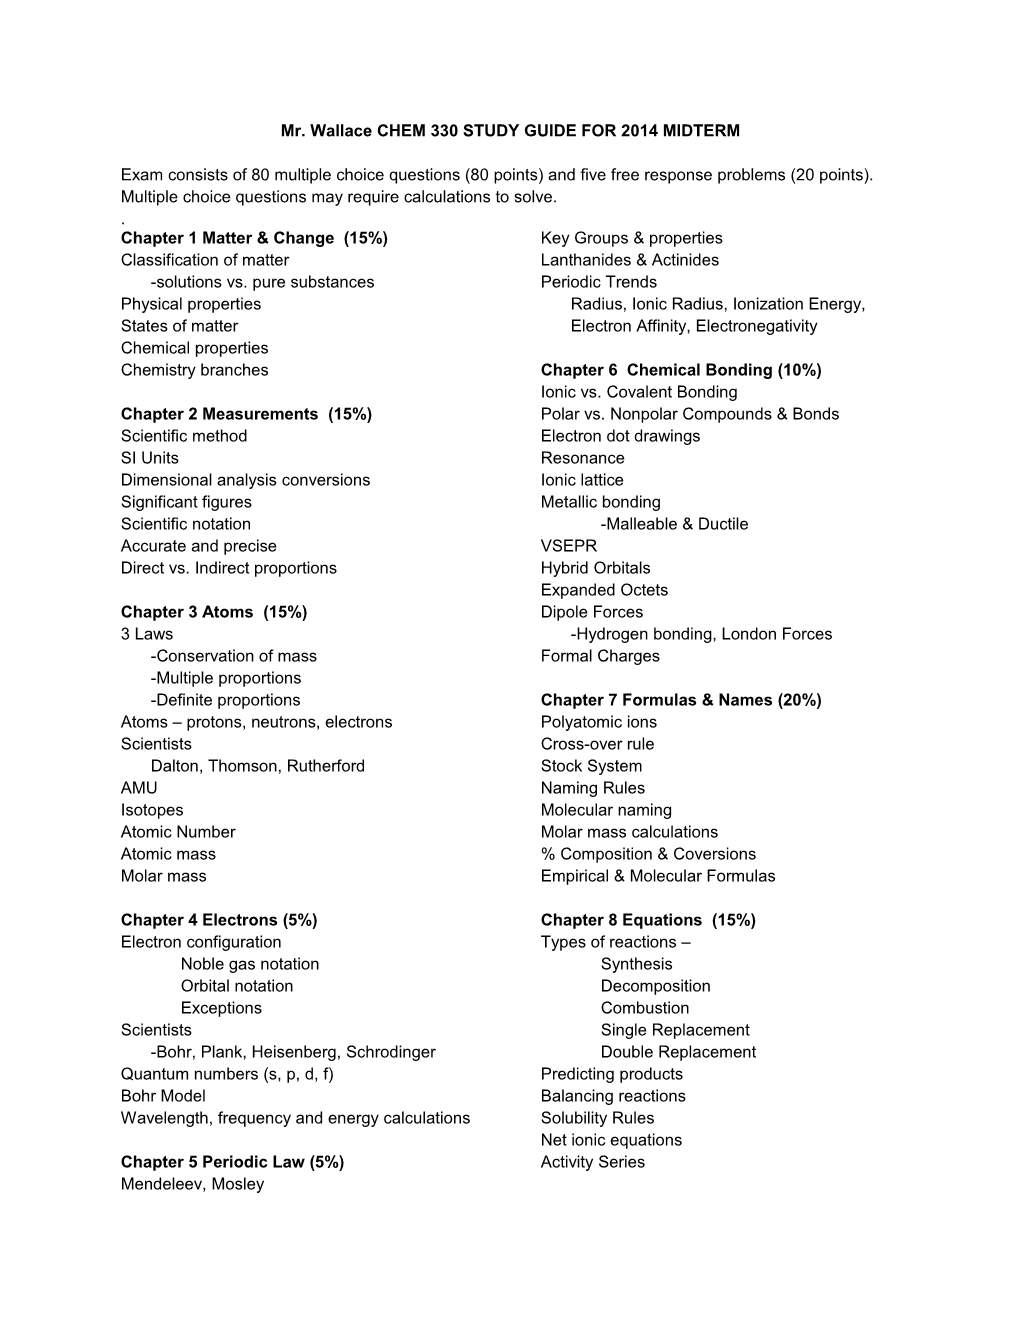 Mr. Wallace CHEM 330 STUDY GUIDE for 2014MIDTERM